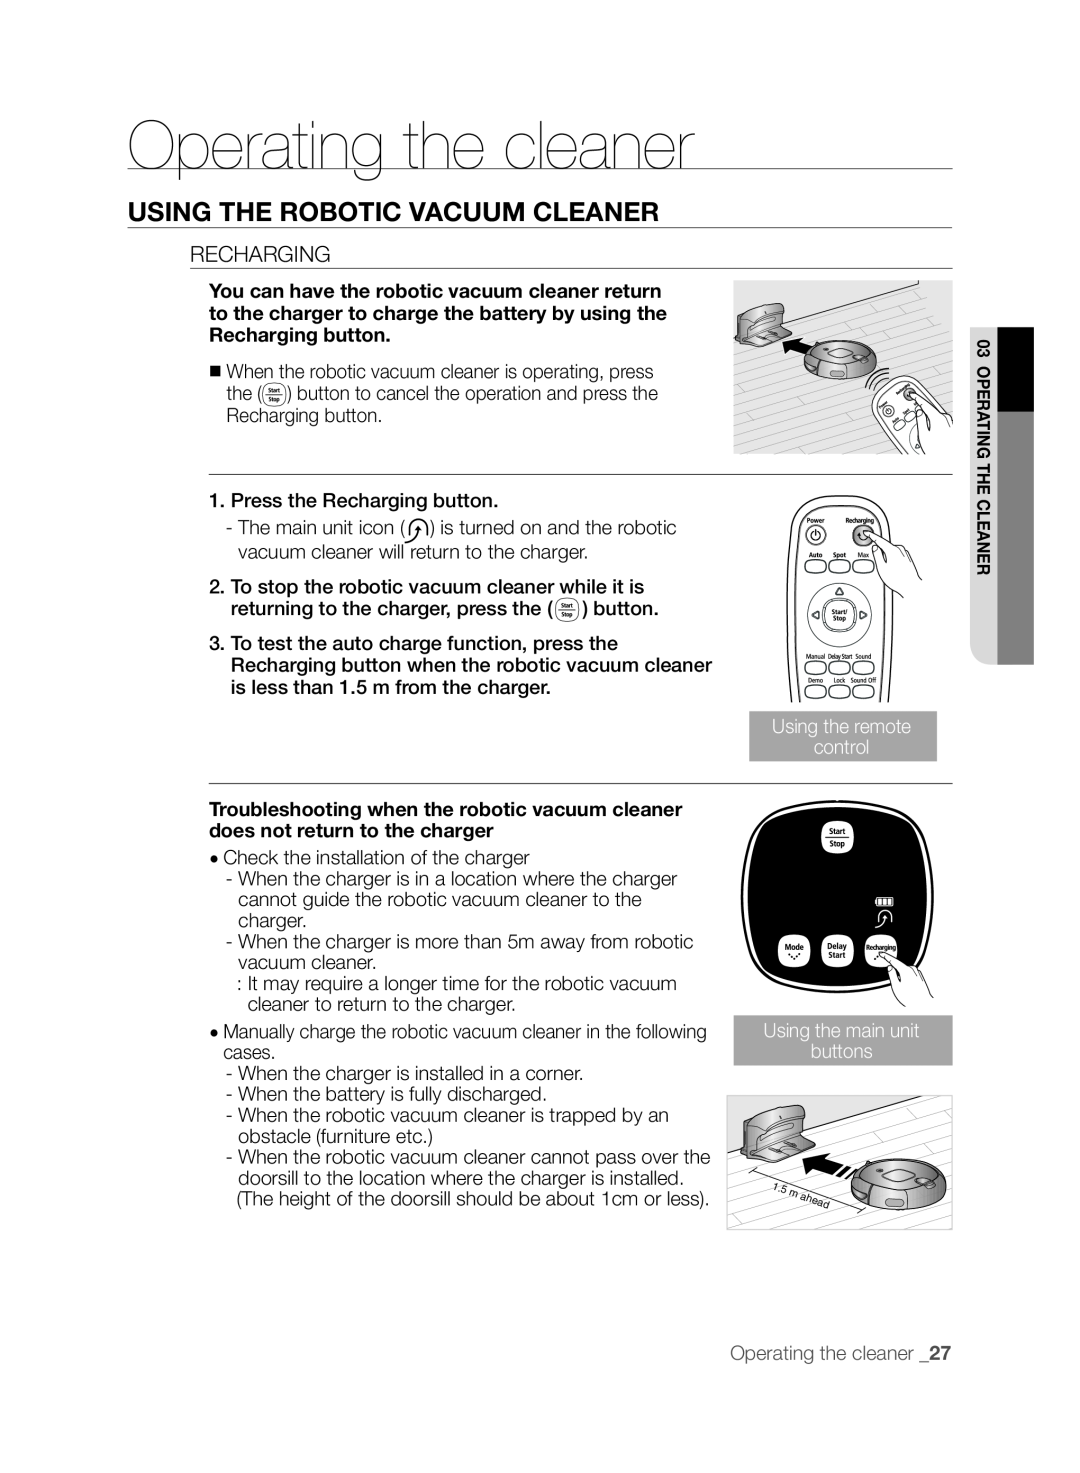 Samsung VCR8830T1R, SR8830, DJ68-00518A Operating the cleaner, Using the robotic vacuum cleaner, Using the remote control 